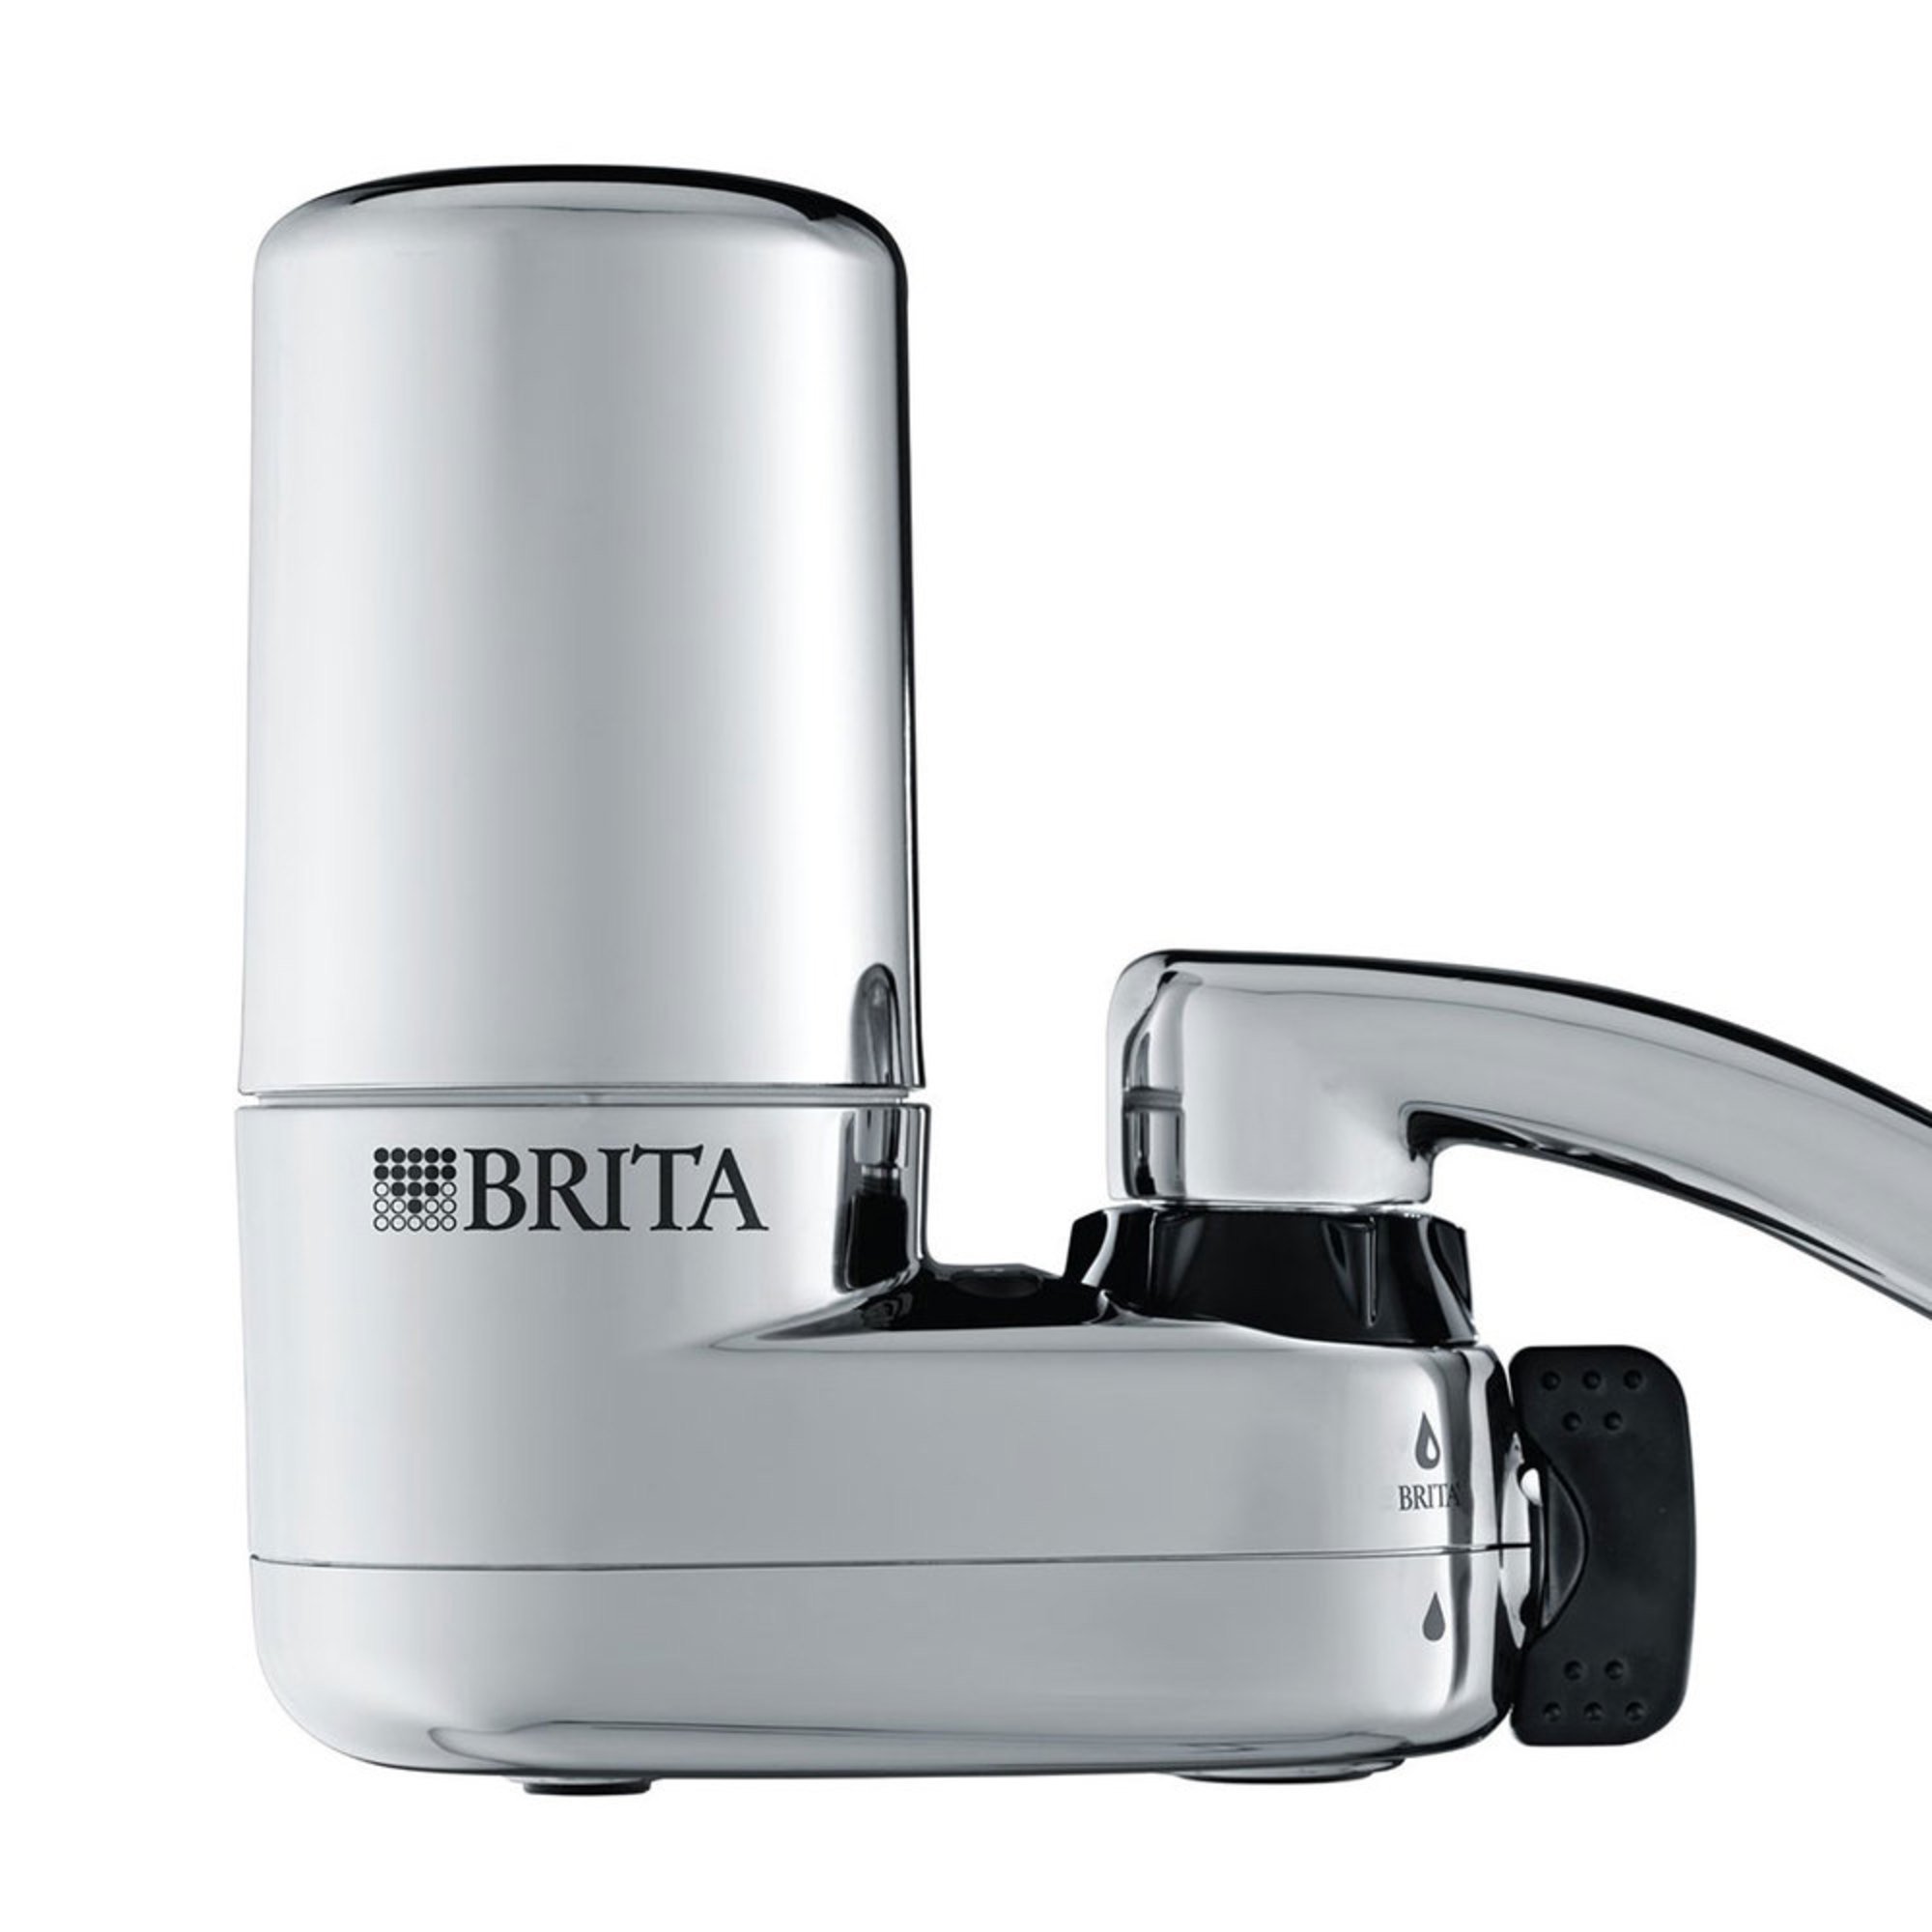 Brita On Tap Chrome Water Faucet Filtration System 35618 Water